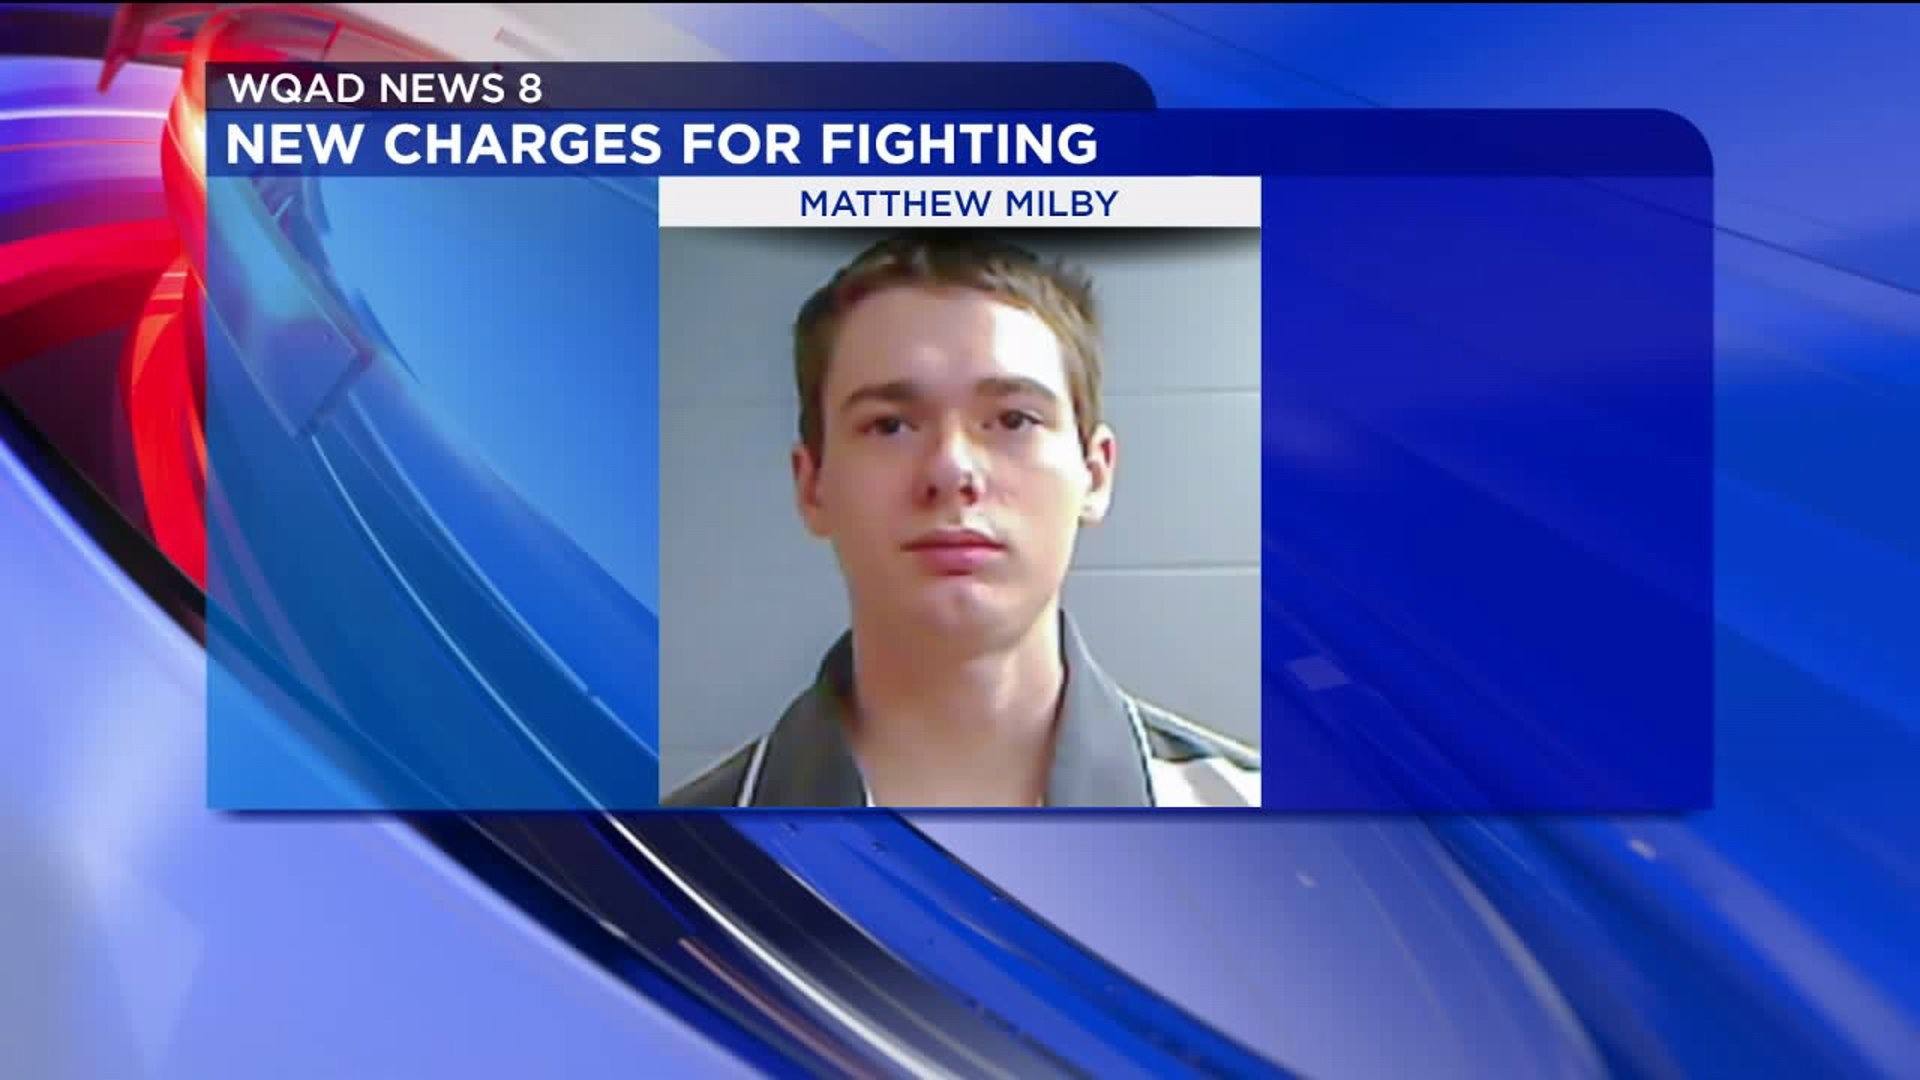 Milby faces new charges